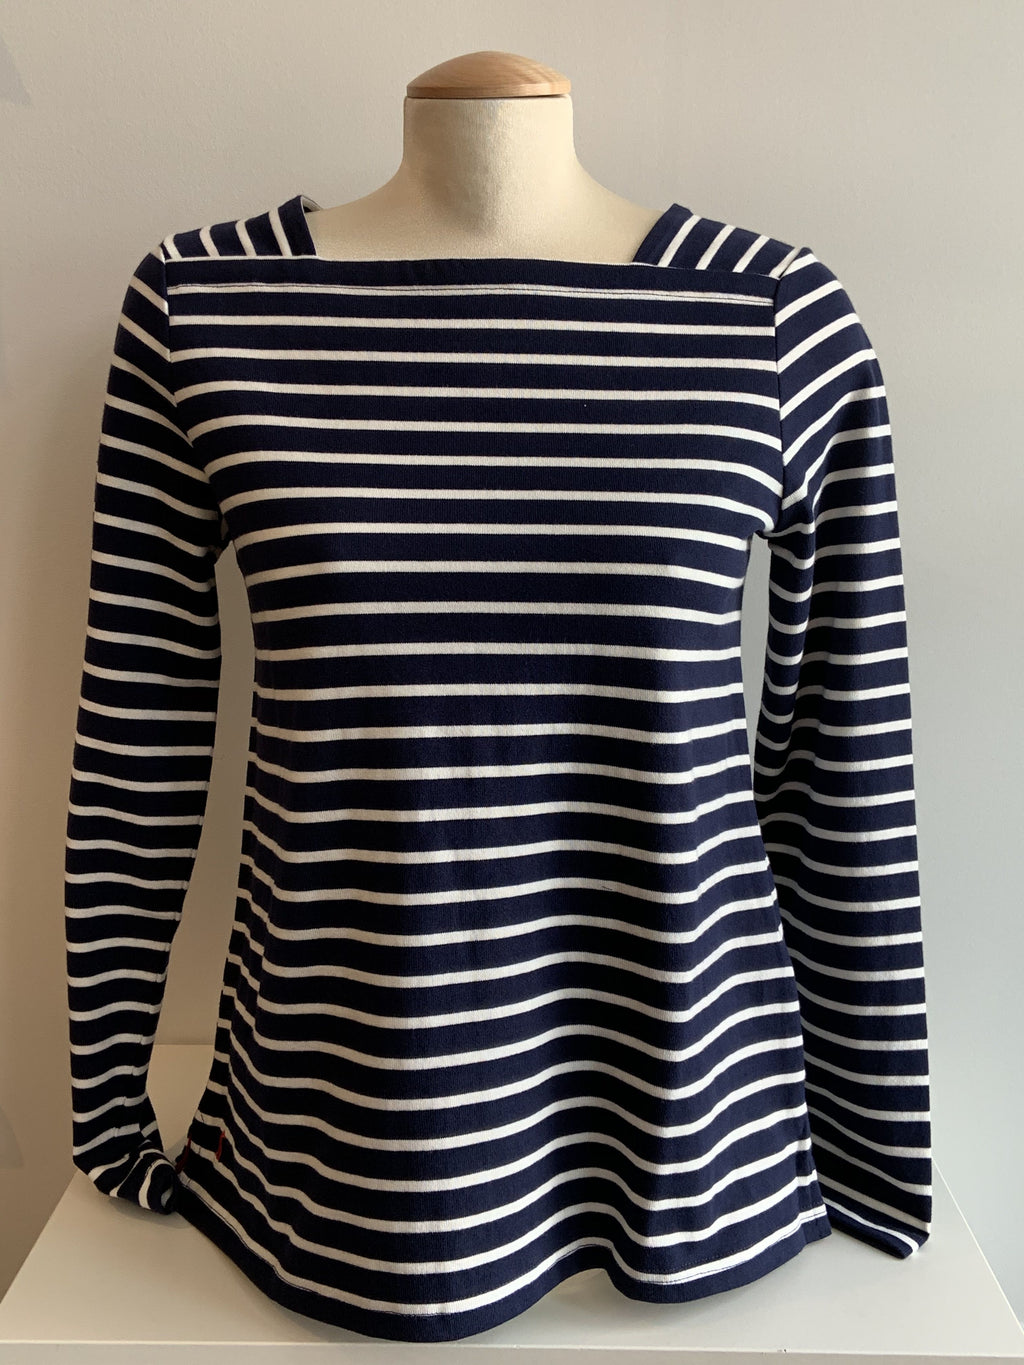 Square Neck Transitional Tee - Navy Stripe